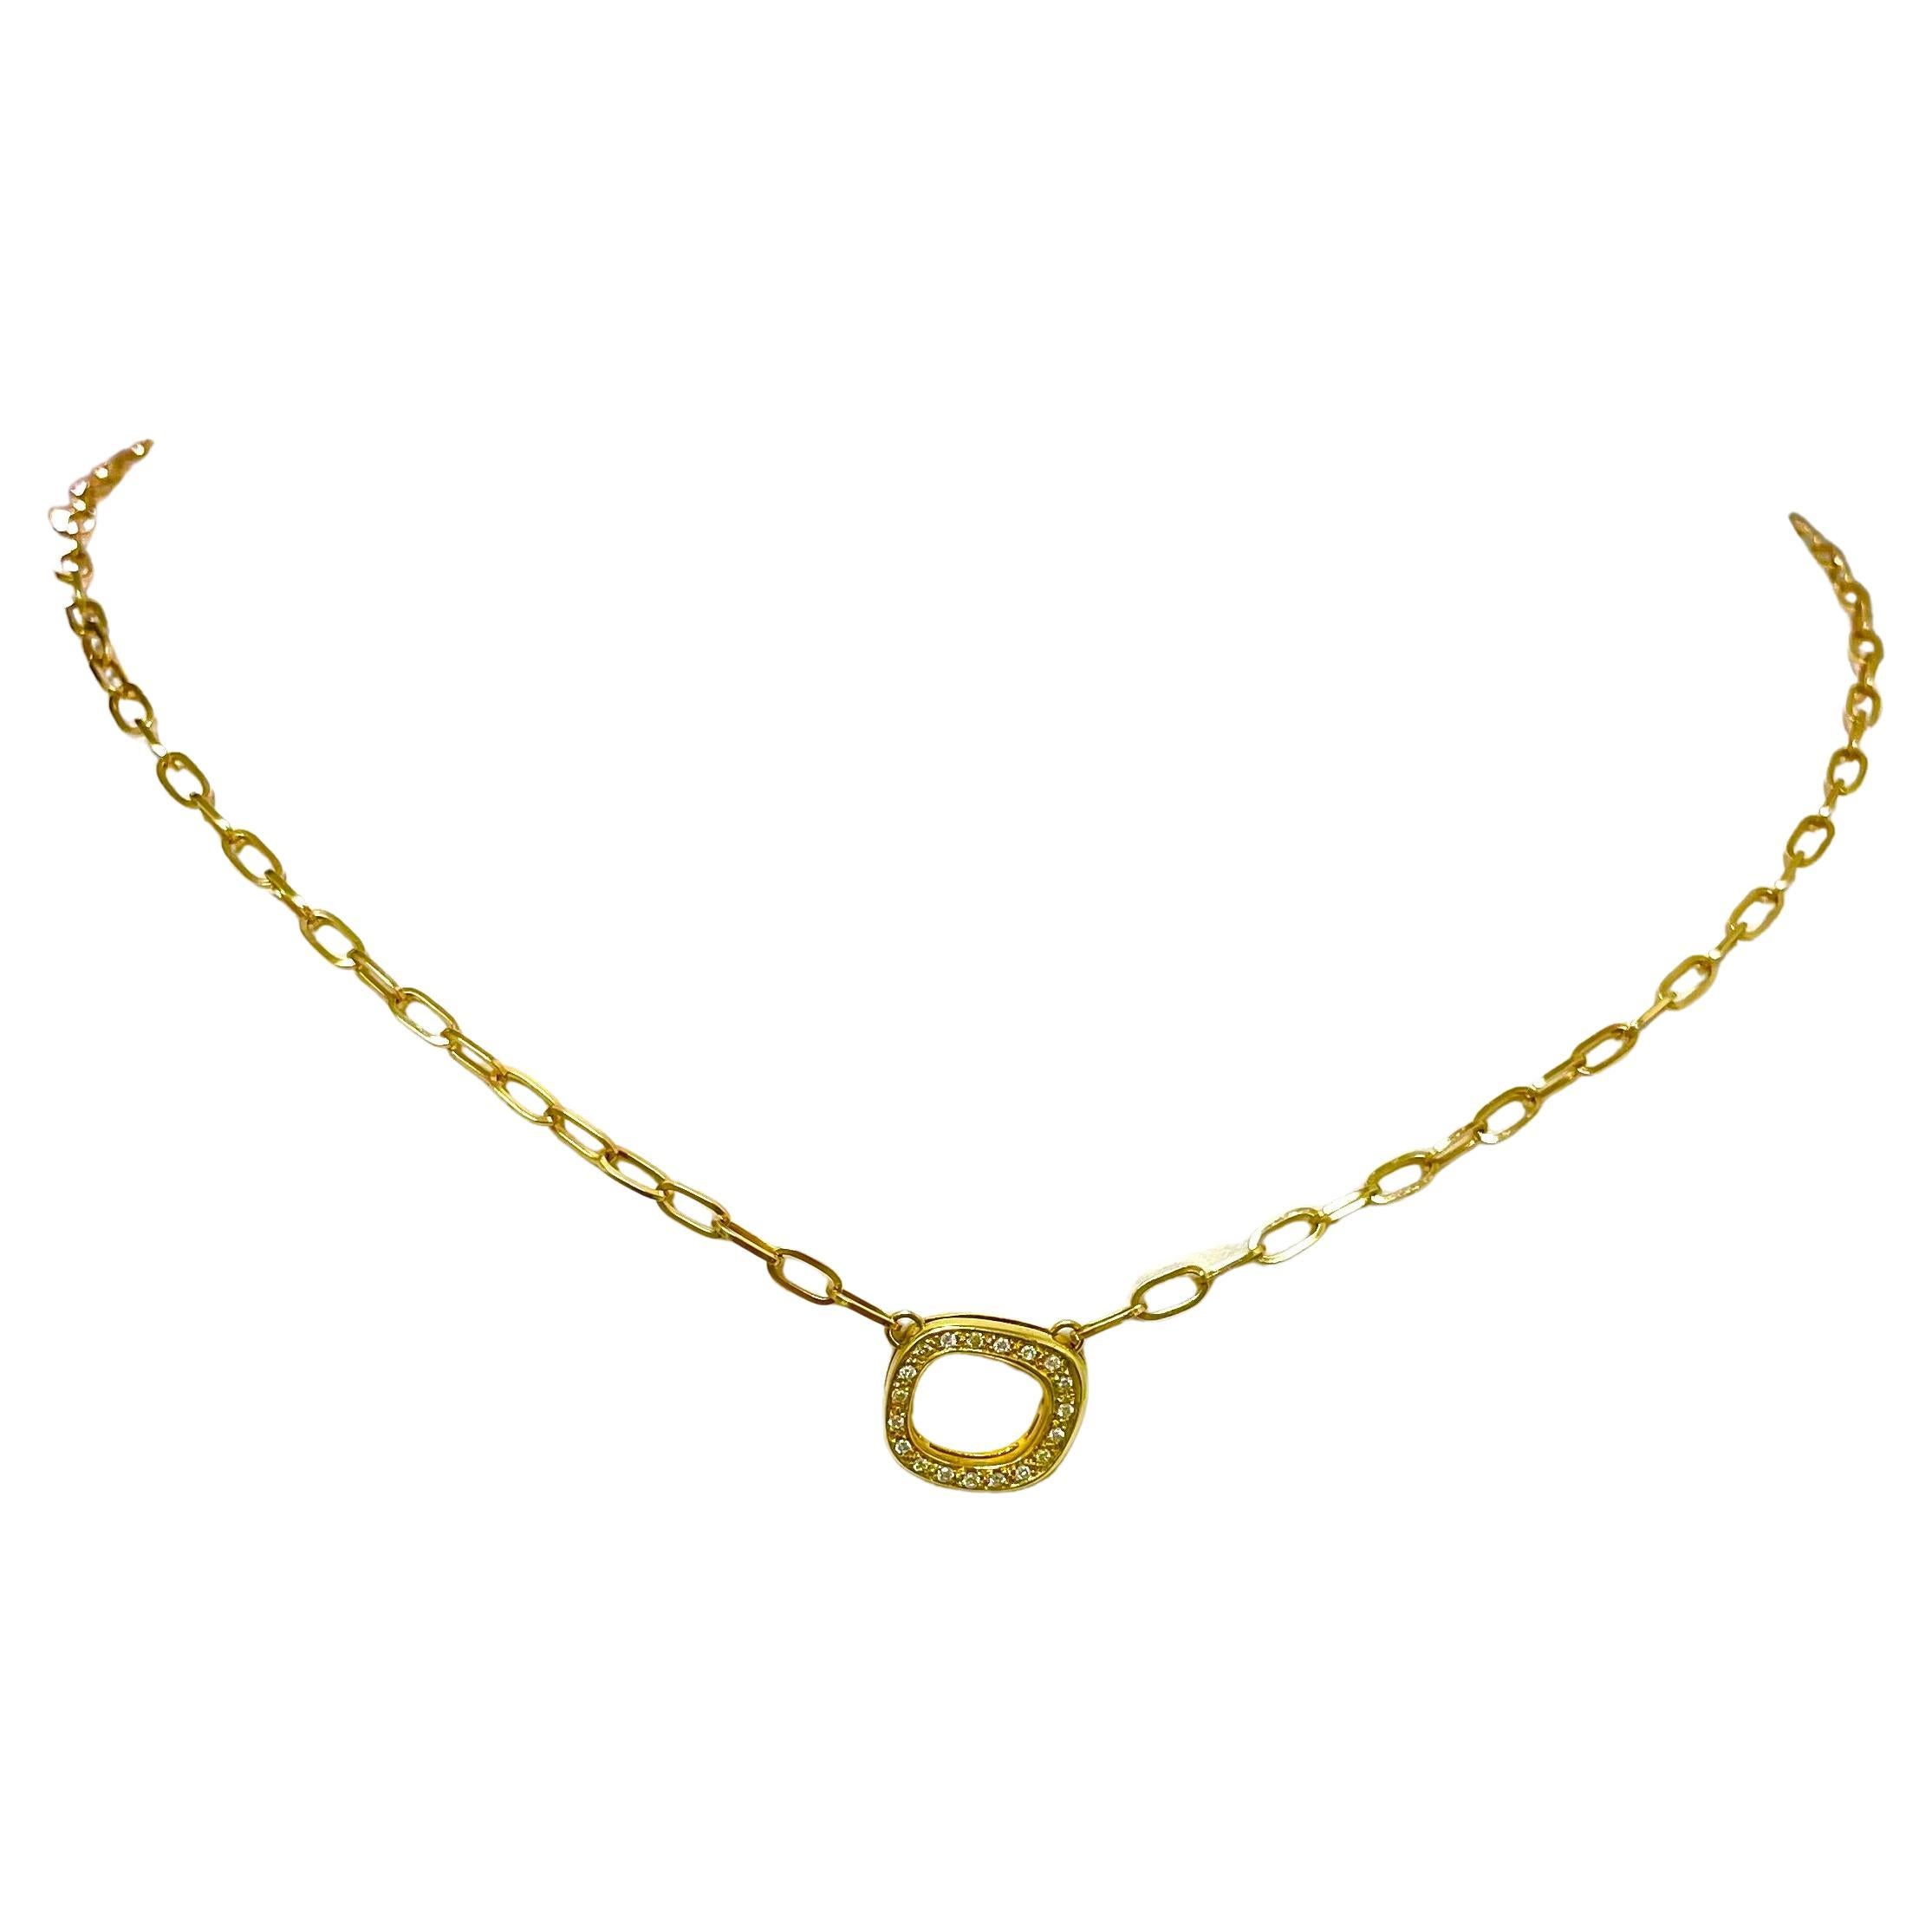 Pave Diamond Pendant with Gold Chain Necklace 5